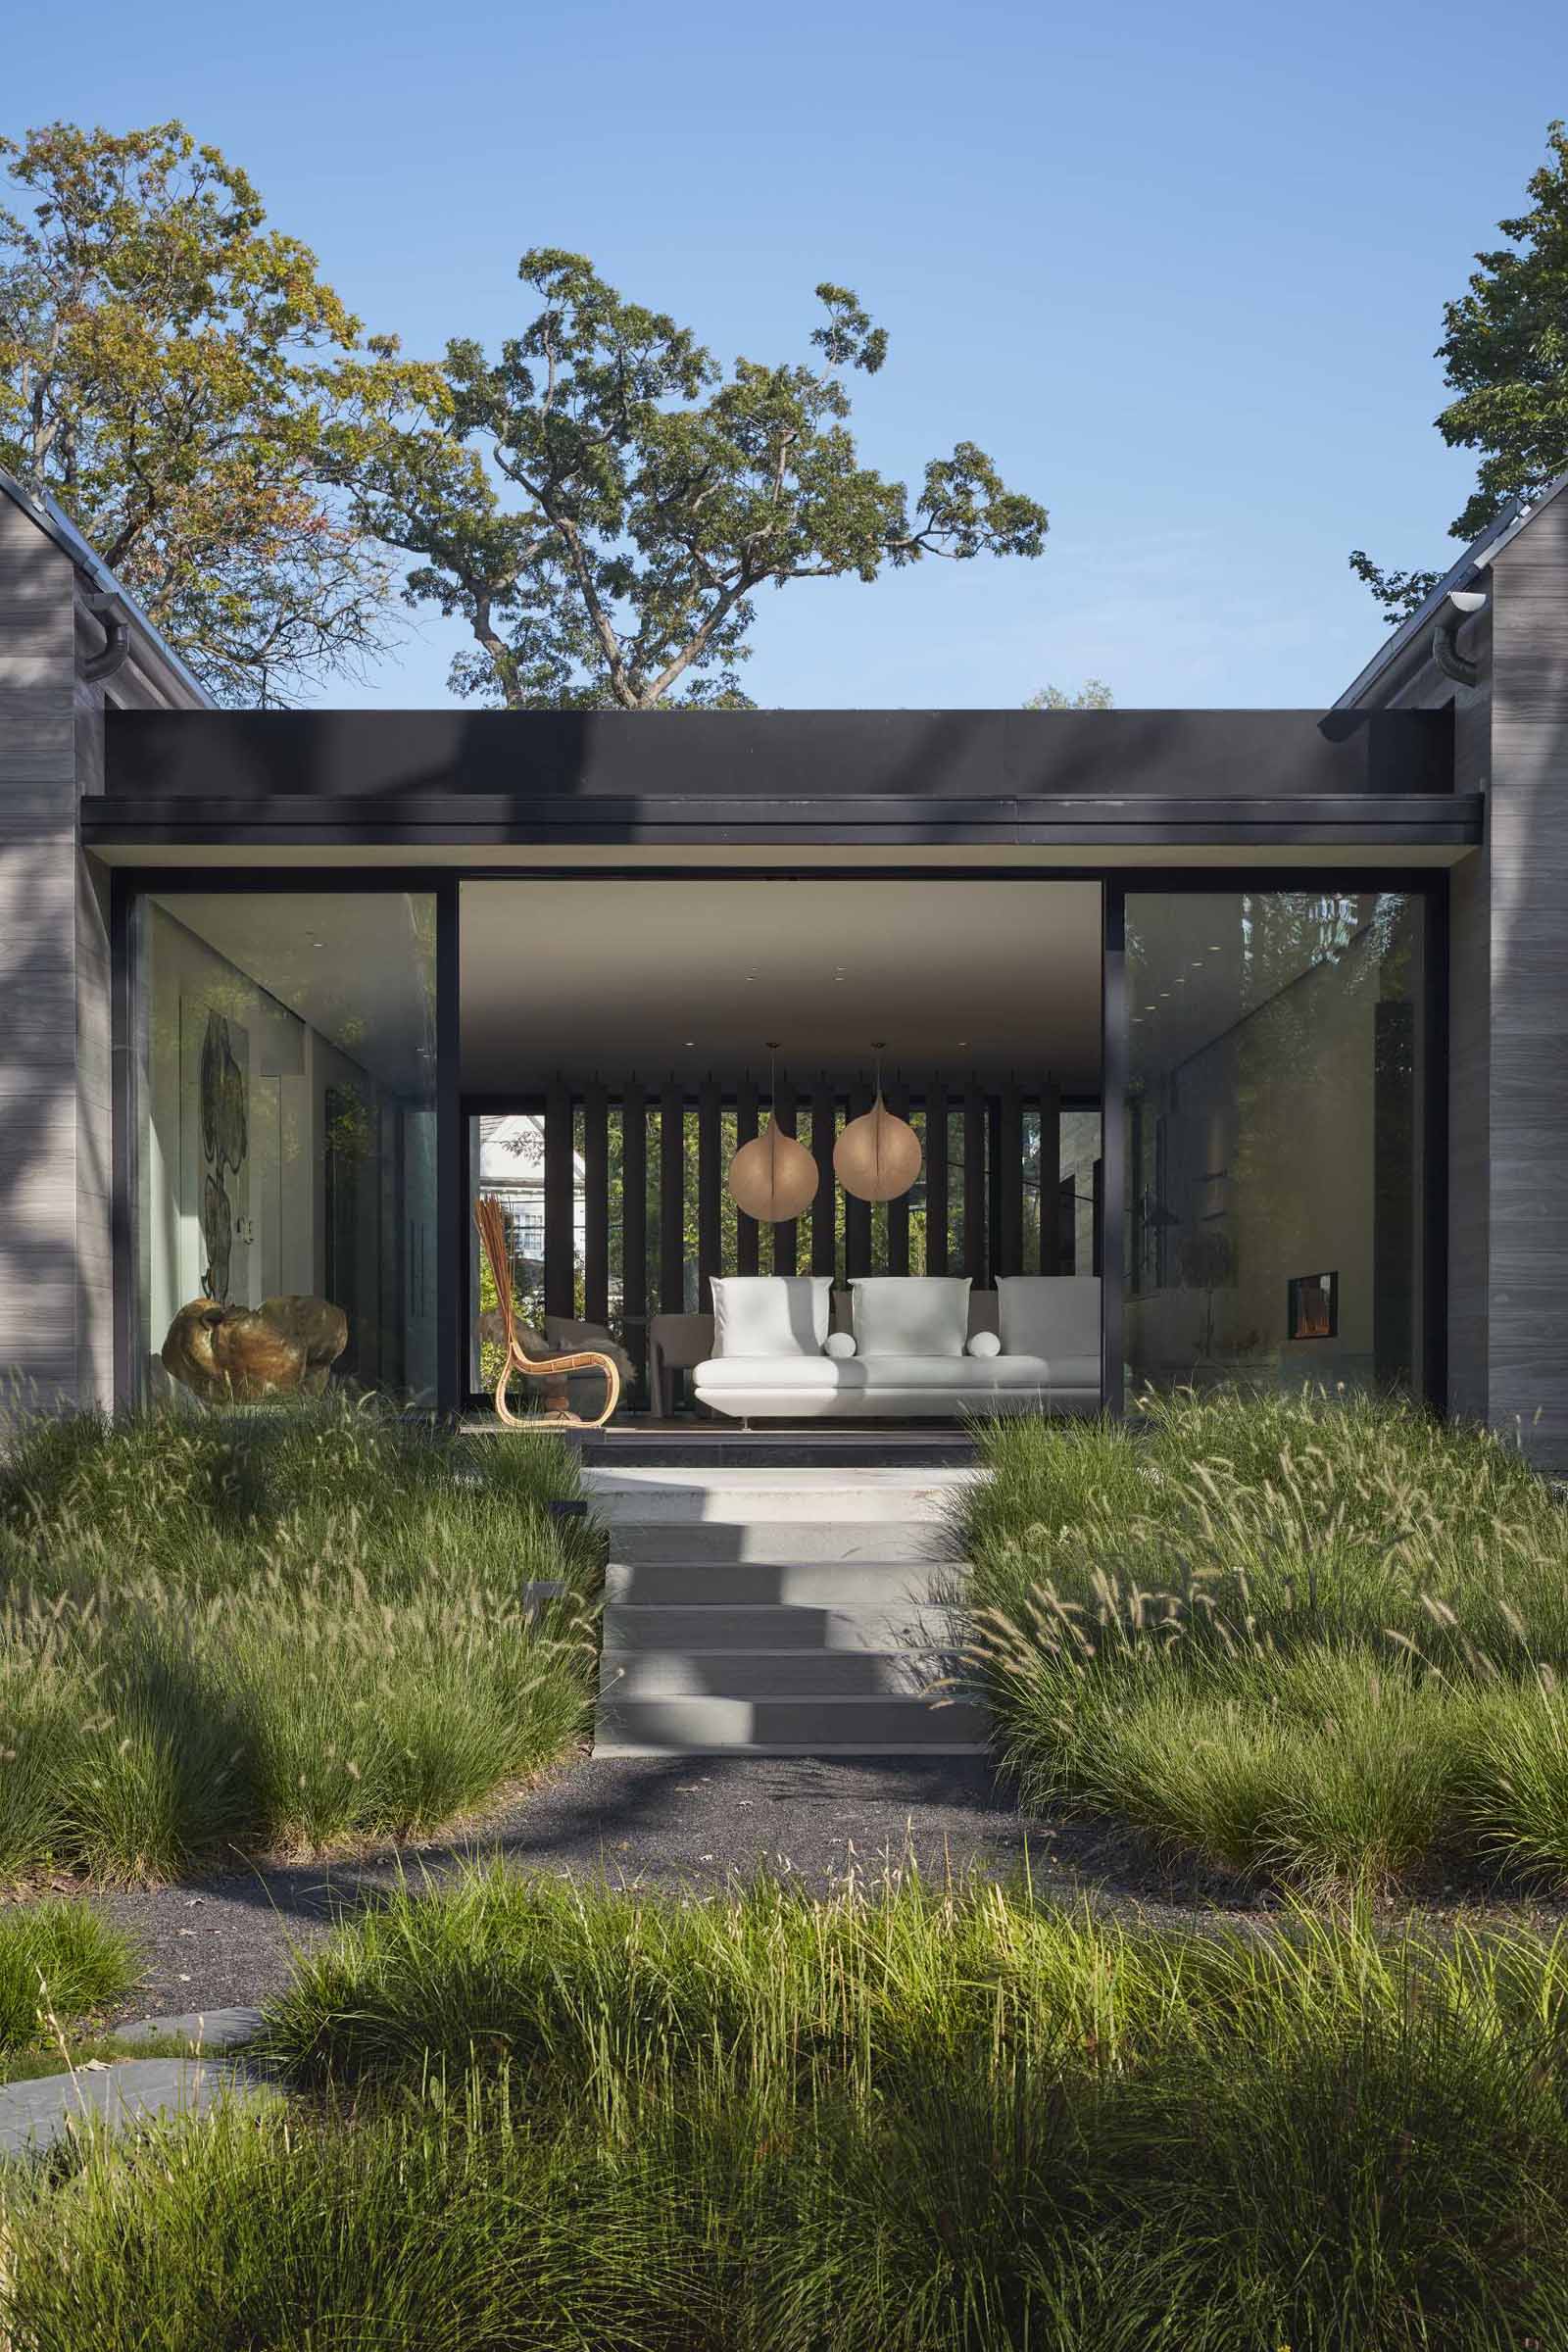 Sliding glass doors open the breezeway of this modern house to outdoor stairs flanked by various grasses.